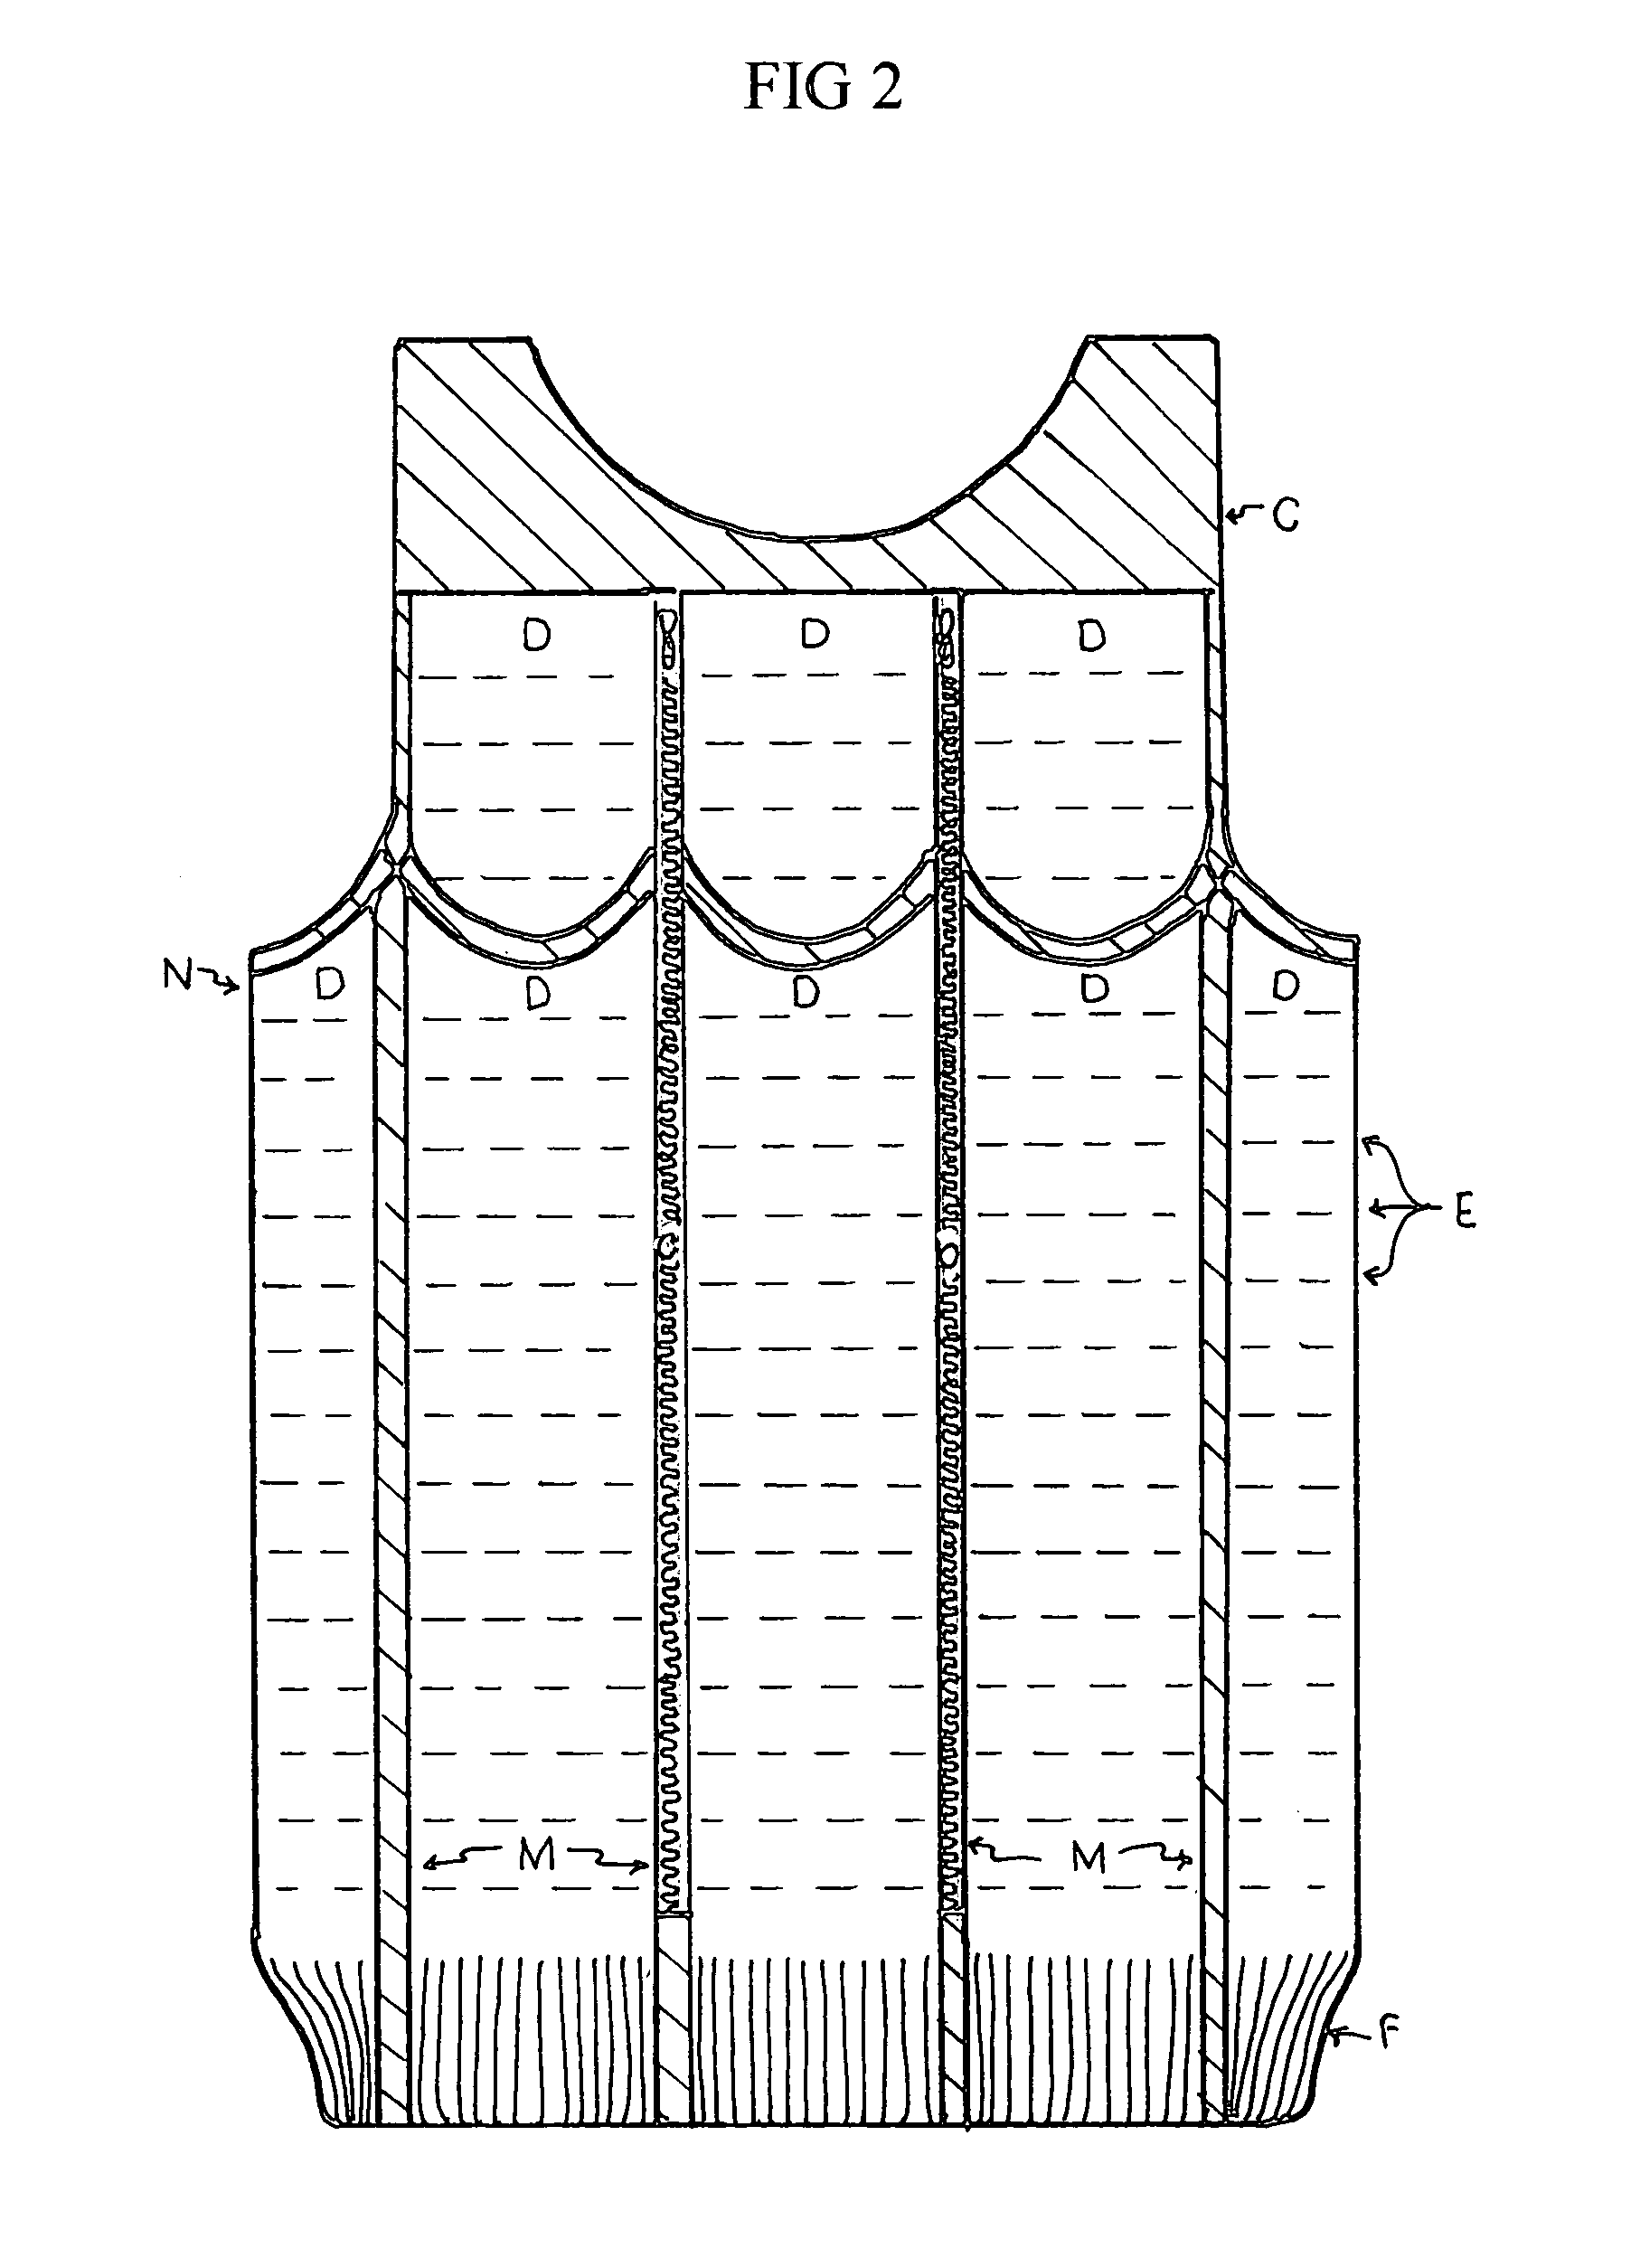 Weaving process for production of a full fashioned woven stretch garment with load carriage capability